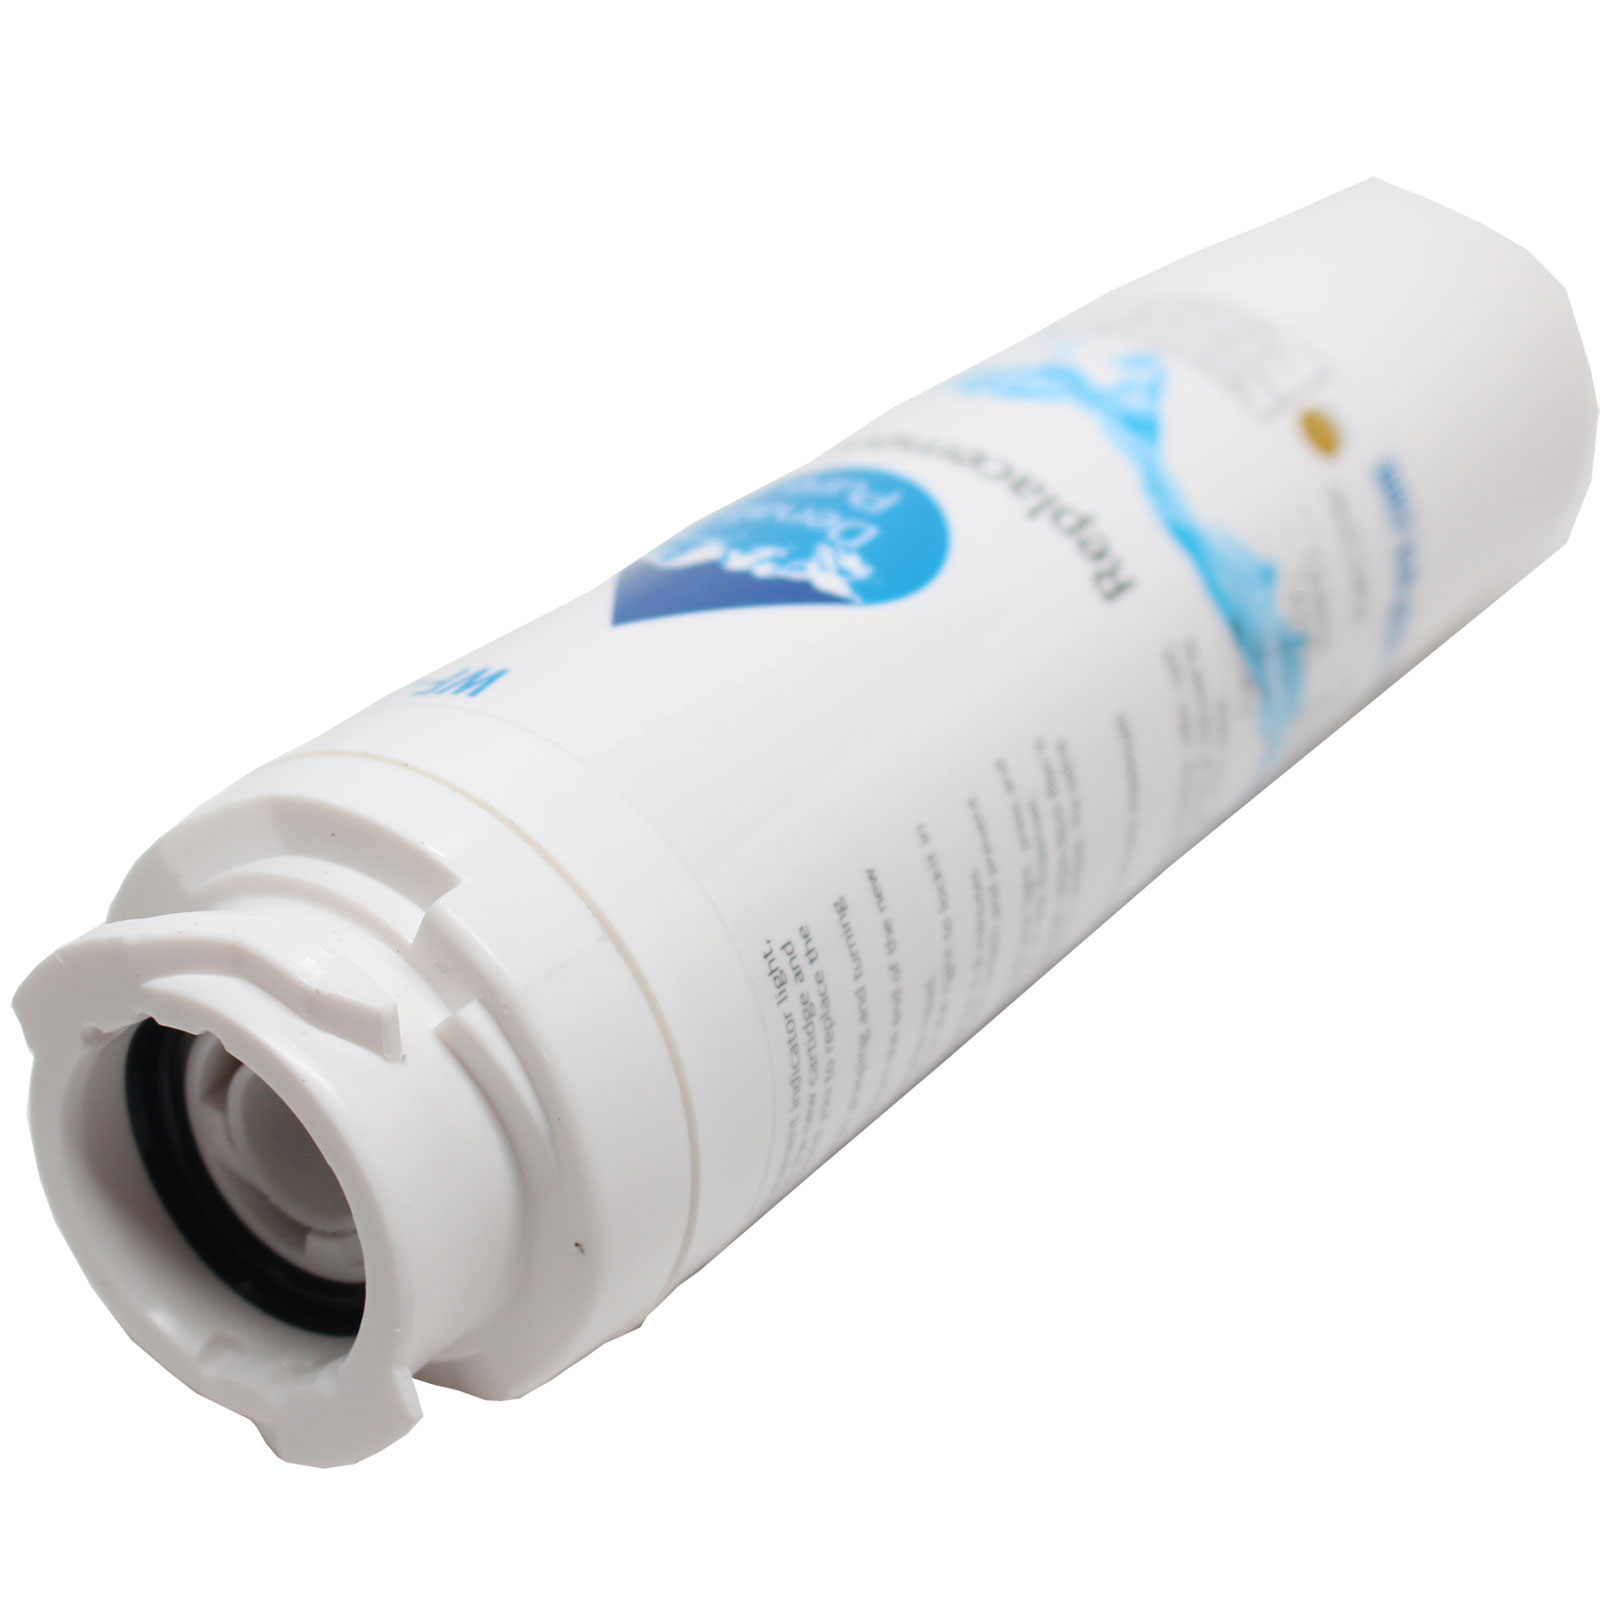 Replacement General Electric PSCS3RGXAFSS Refrigerator Water Filter - Compatible General Electric MSWF Fridge Water Filter Cartridge - image 2 of 4